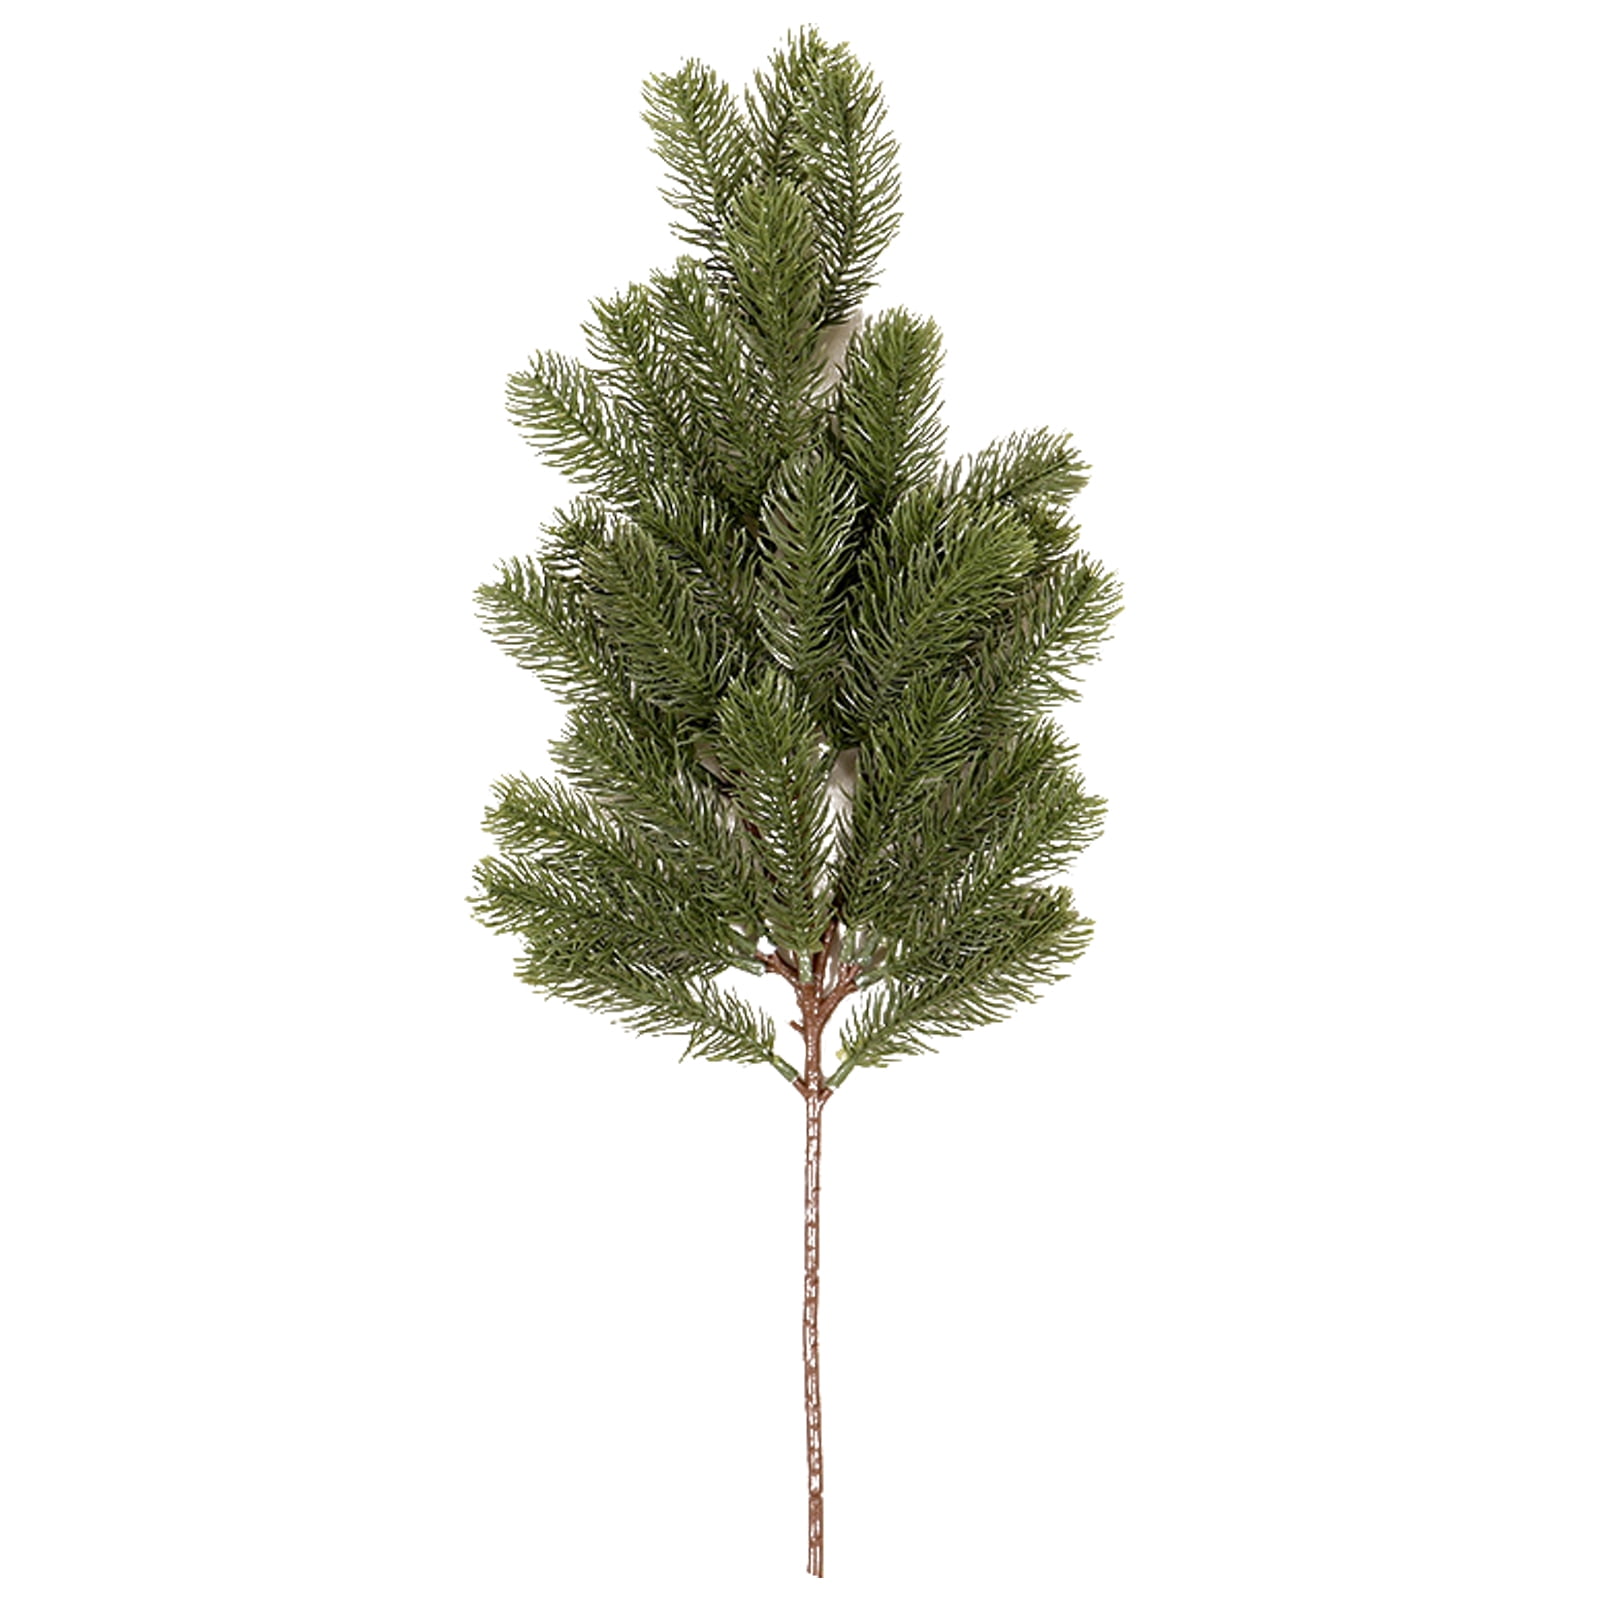 Earthflora > Artificial Pine Branches > 36 inches PVC Long Needle